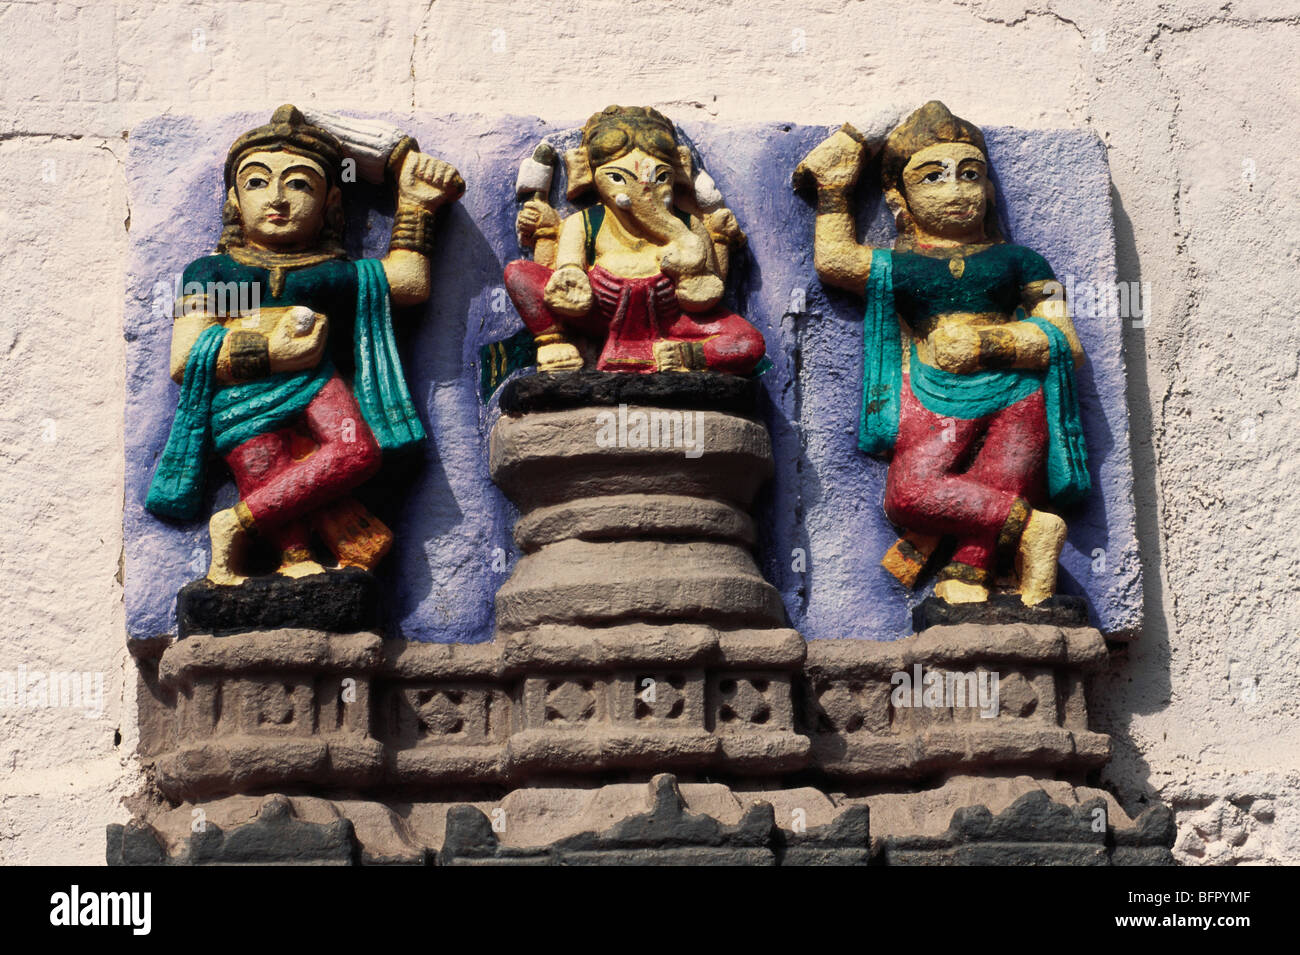 NMK 66802 : Lord Ganesh with wives riddhi and siddhi colourful Idol on temple at Sayla ; Gujarat ; India Stock Photo